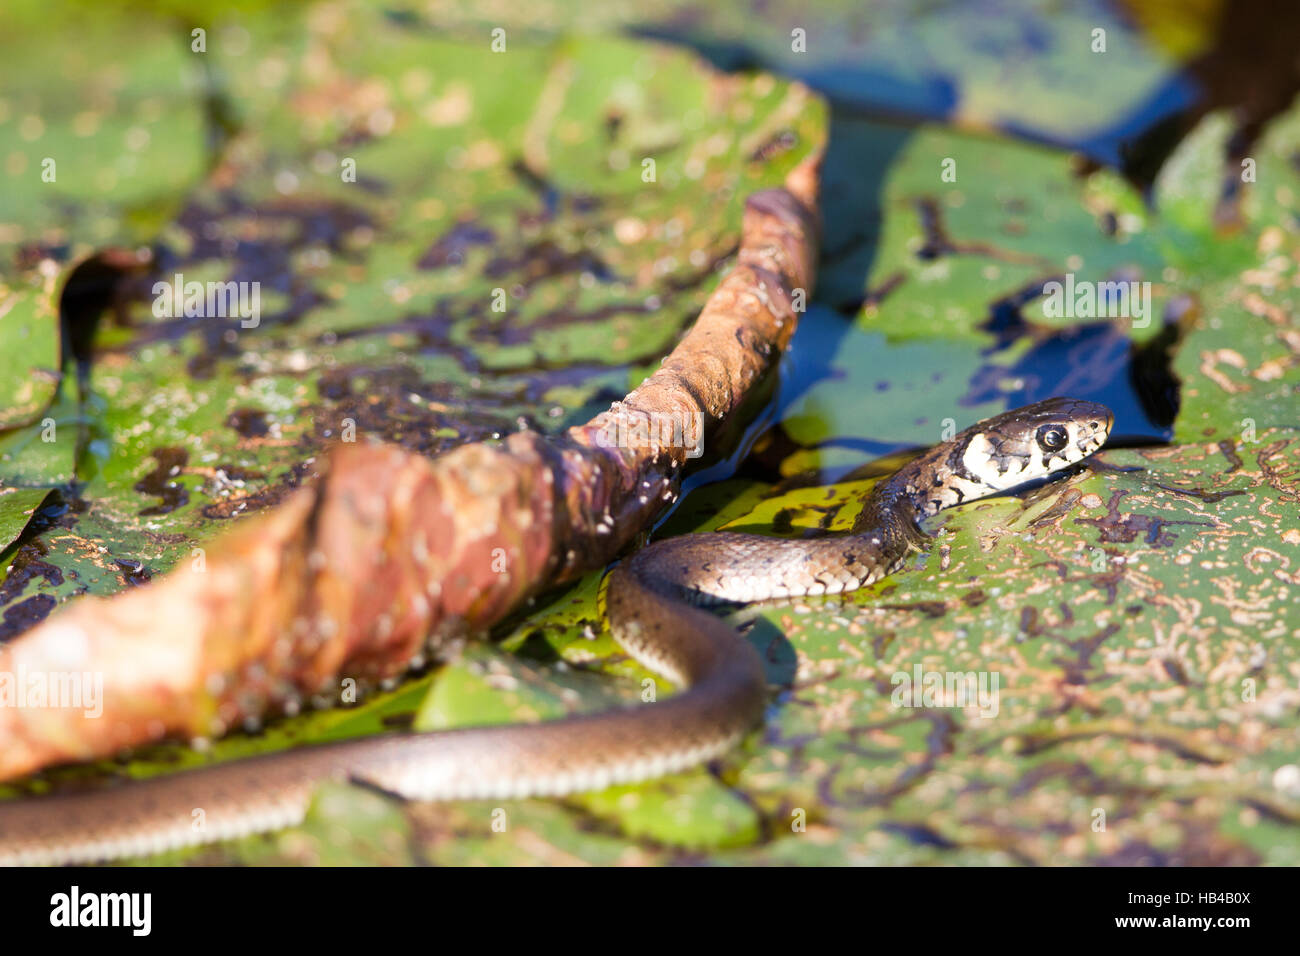 Hunting young European grass snake Stock Photo